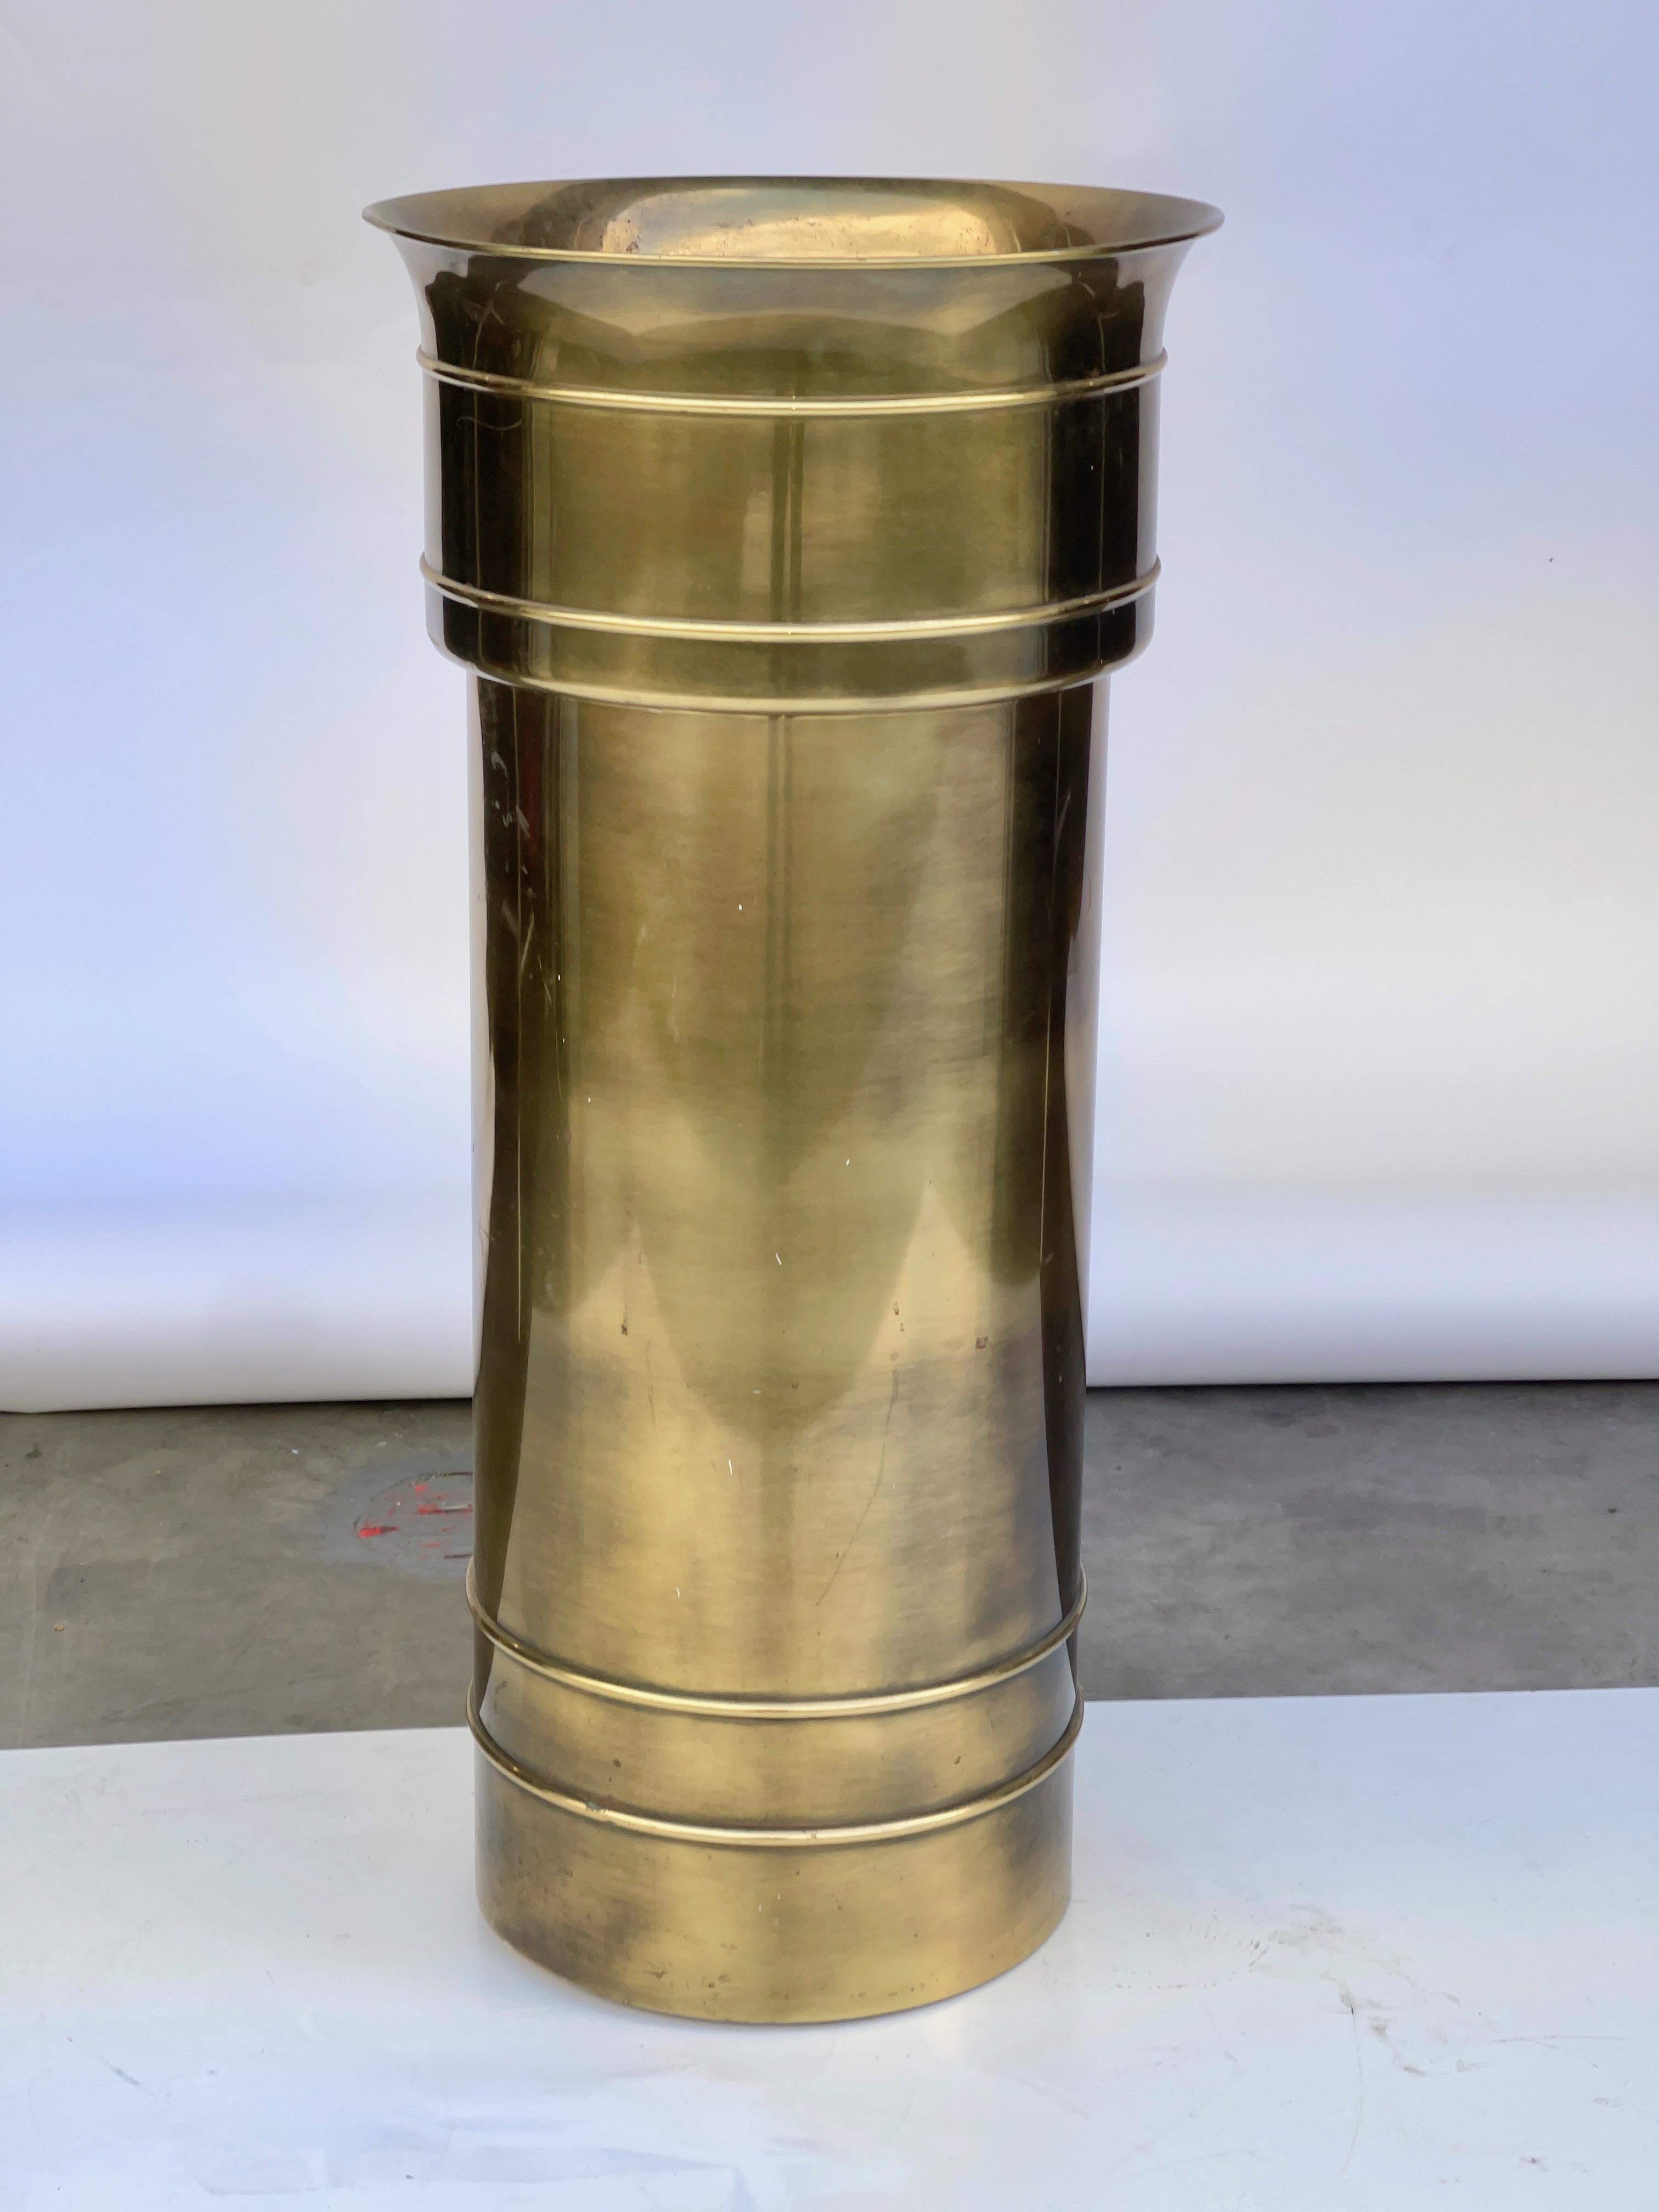 Fabulous pedestal jardiniere by William Doezema for Mastercraft in their signature patinated brass finish. Base is a straight round column which has double rings suggestive of bamboo. The integral top bowl of the pedestal flares out slightly as it